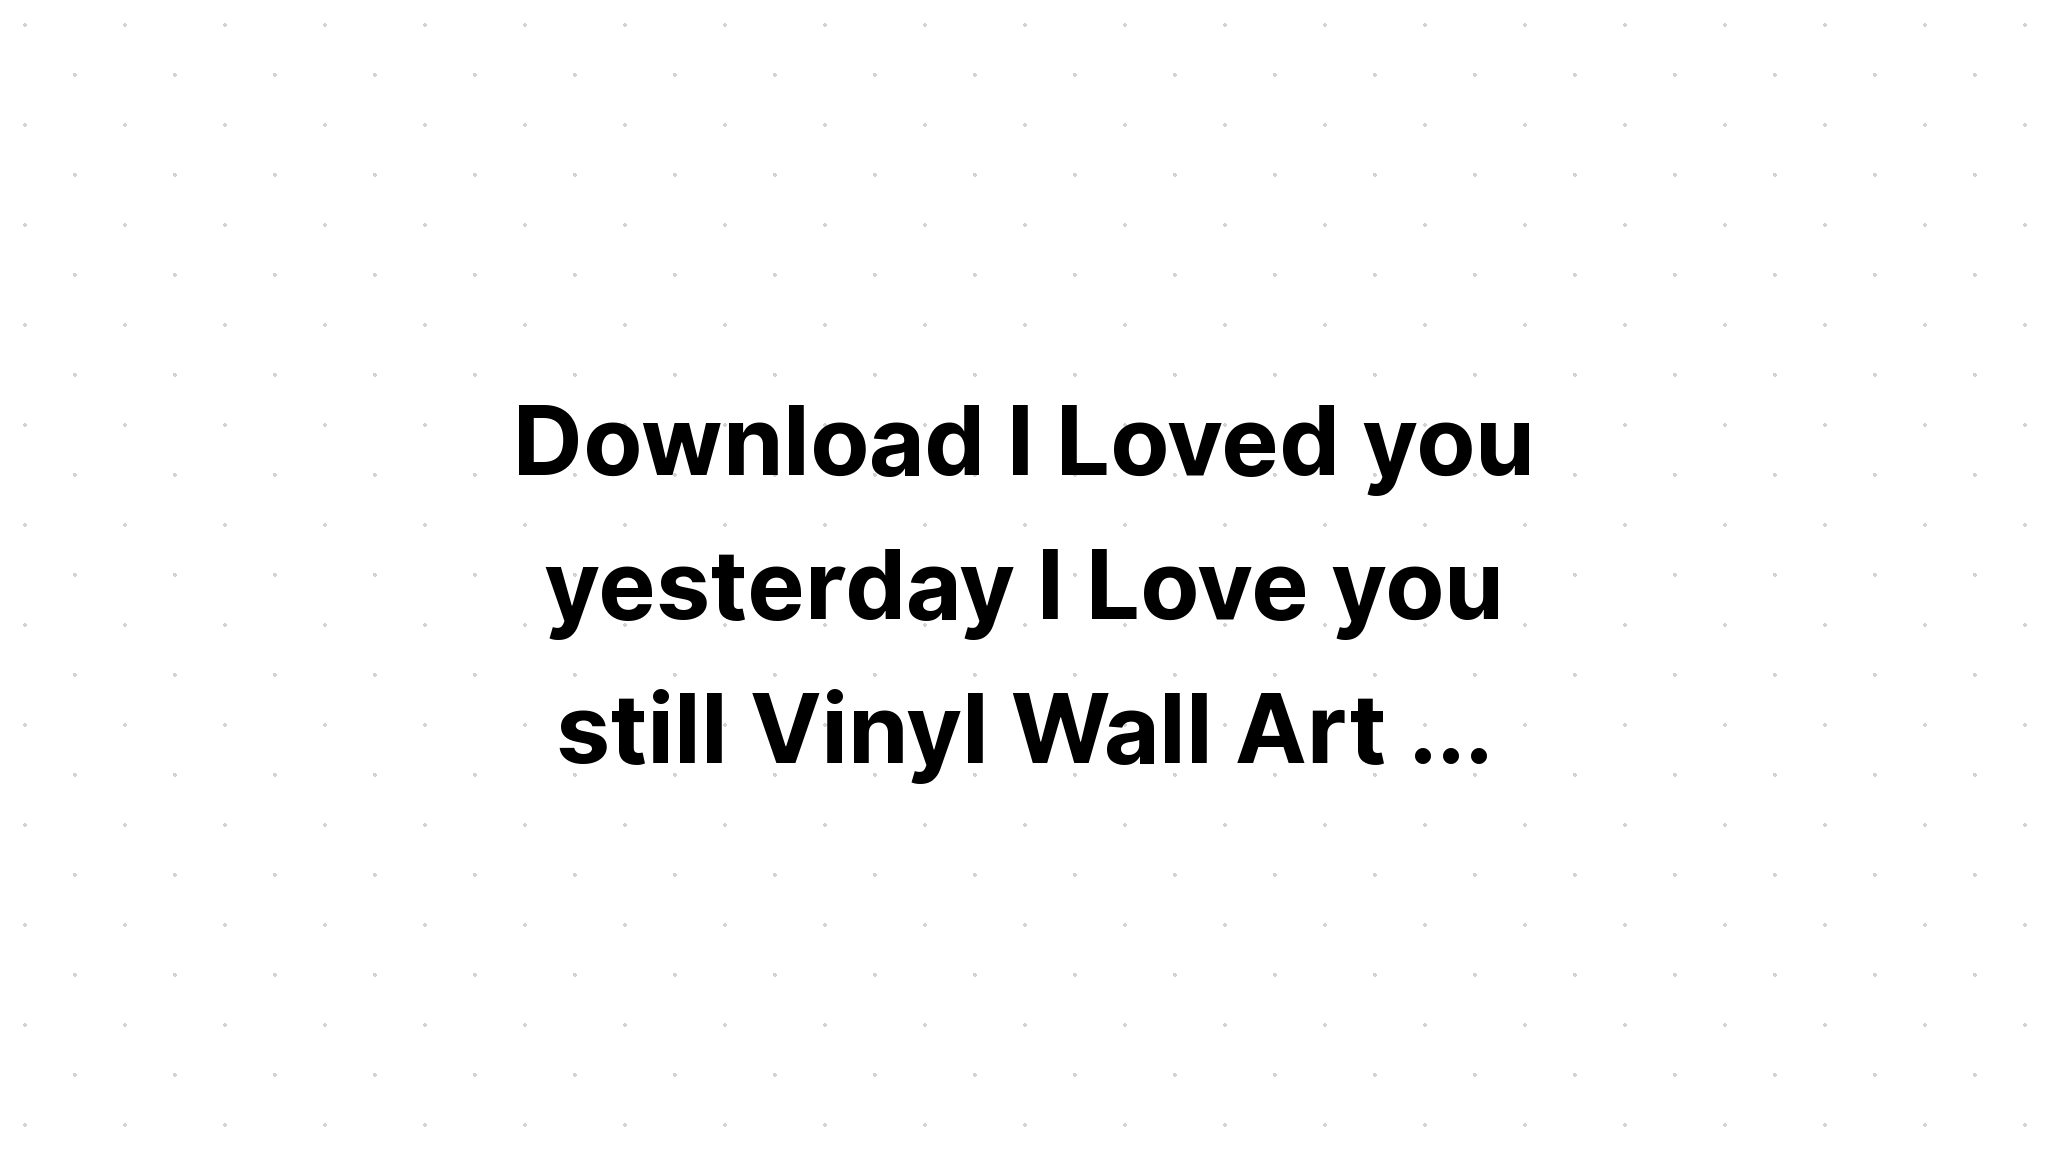 Download Loves You Yesterday Love You Still SVG File